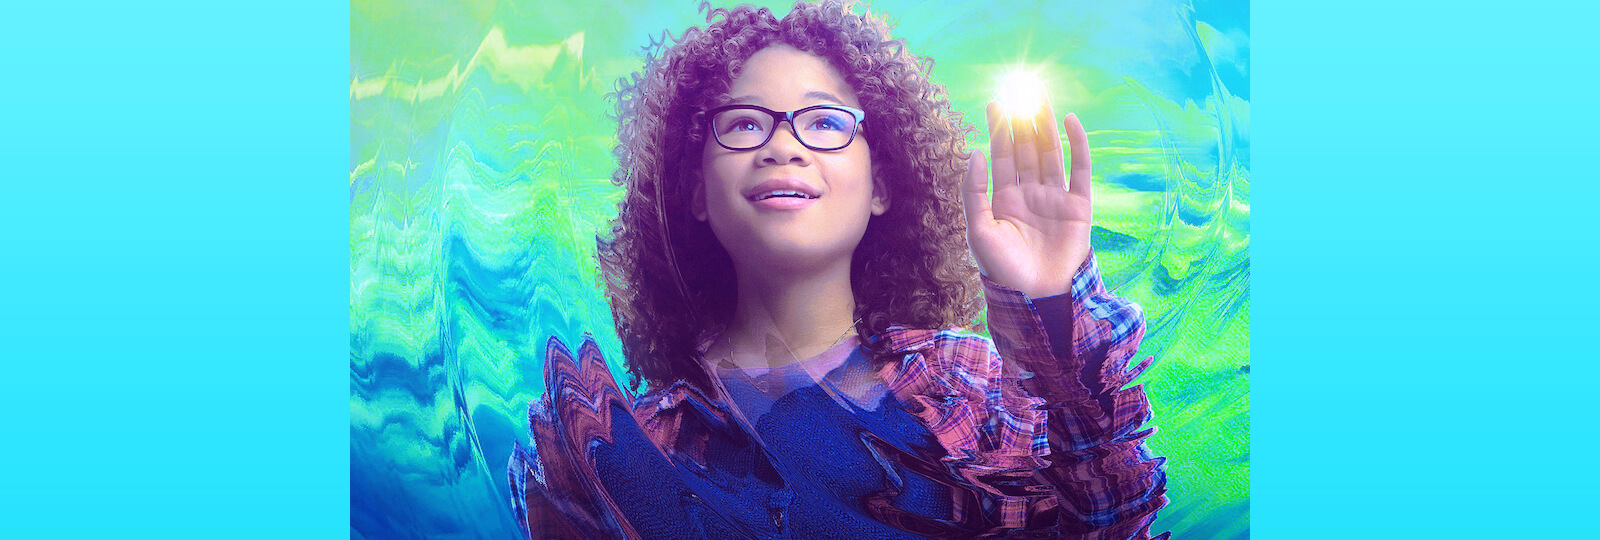 A still from the movie "A Wrinkle In Time"